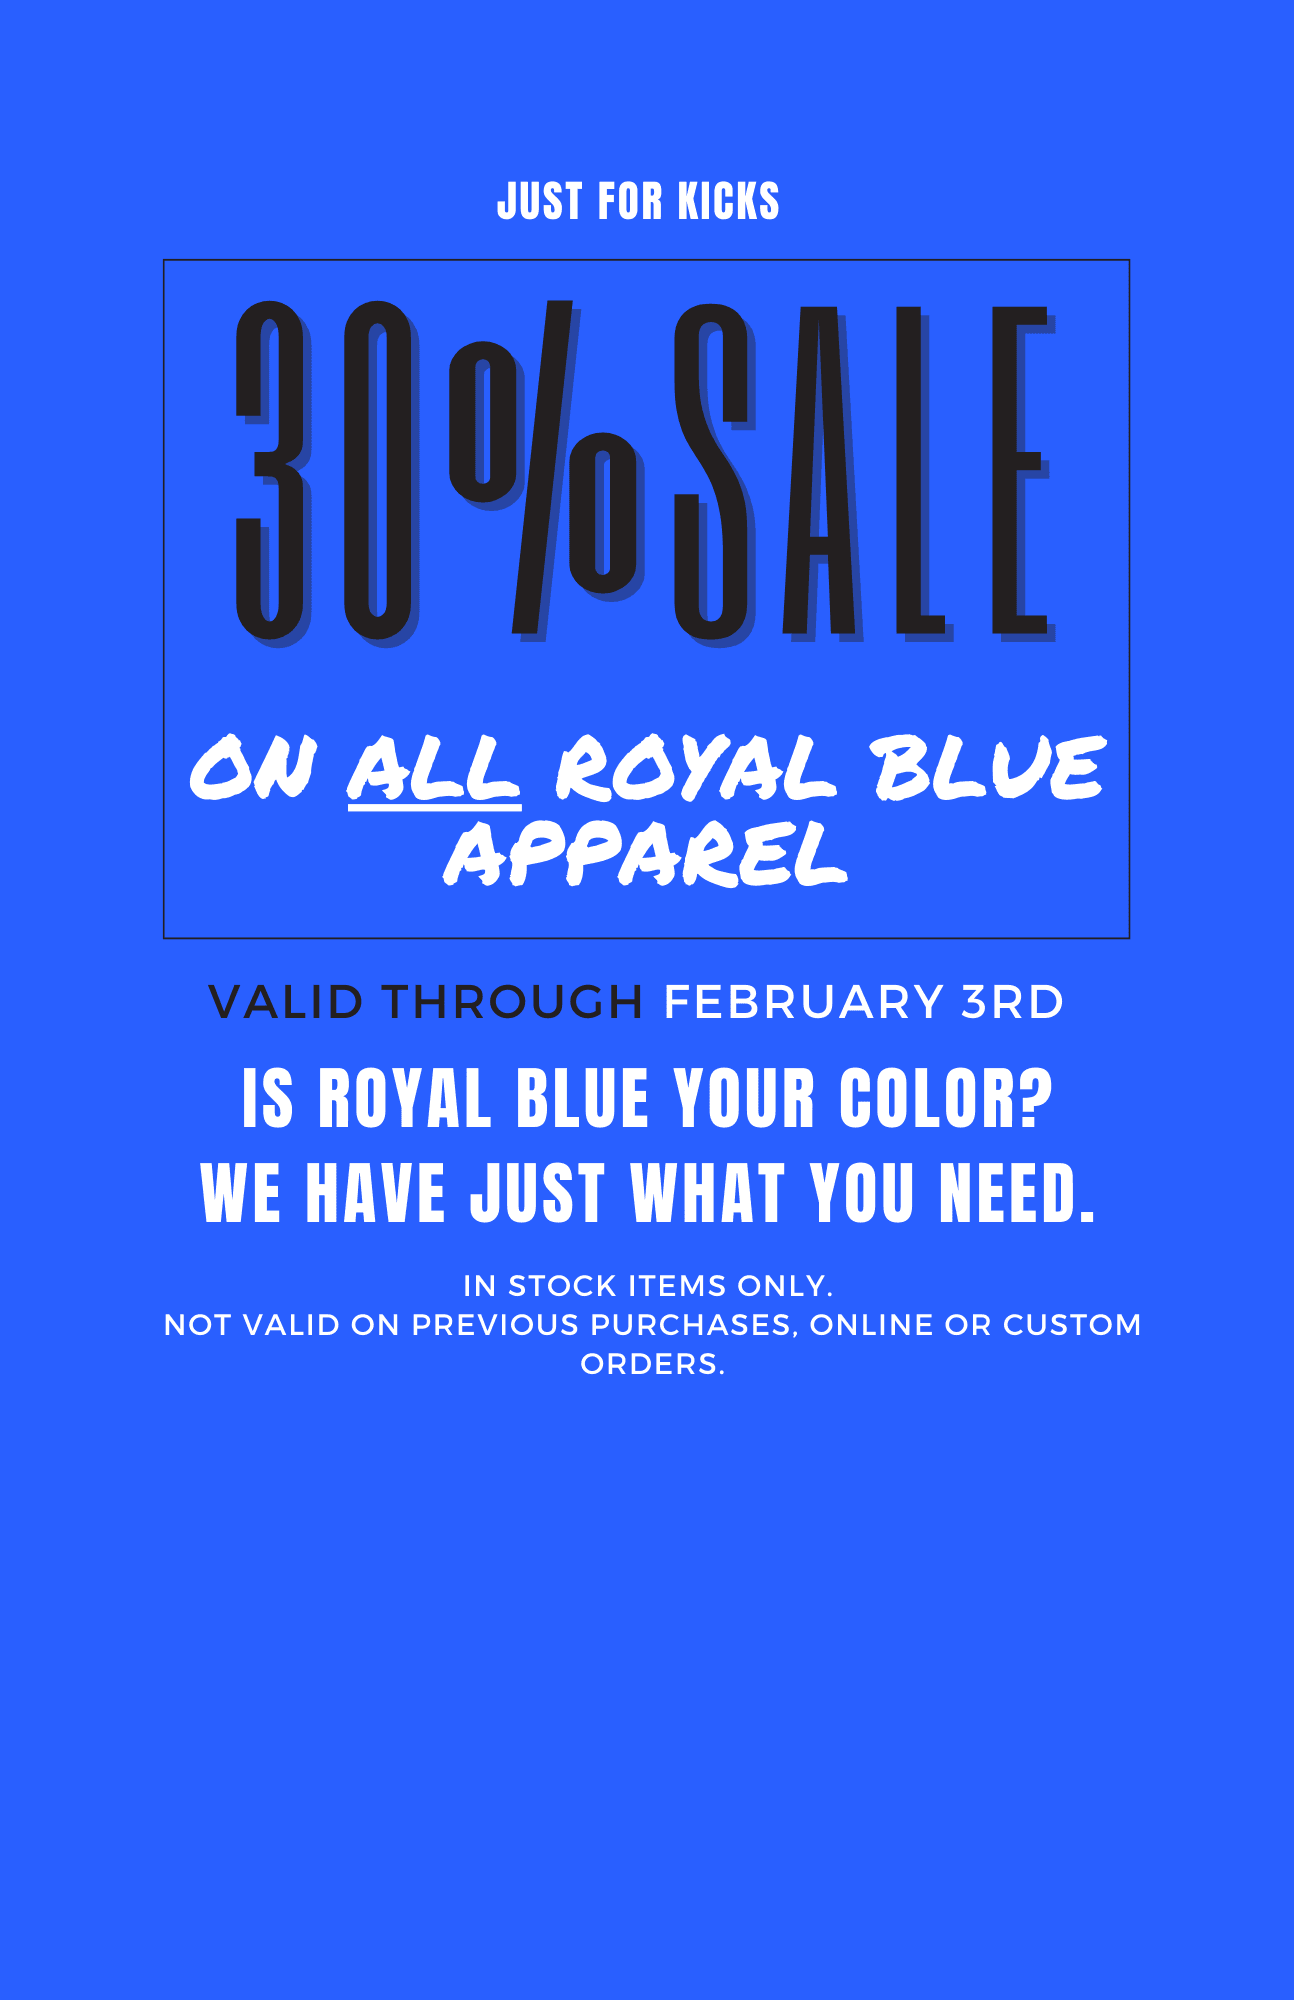 30% off ALL royal blue apparel in-store